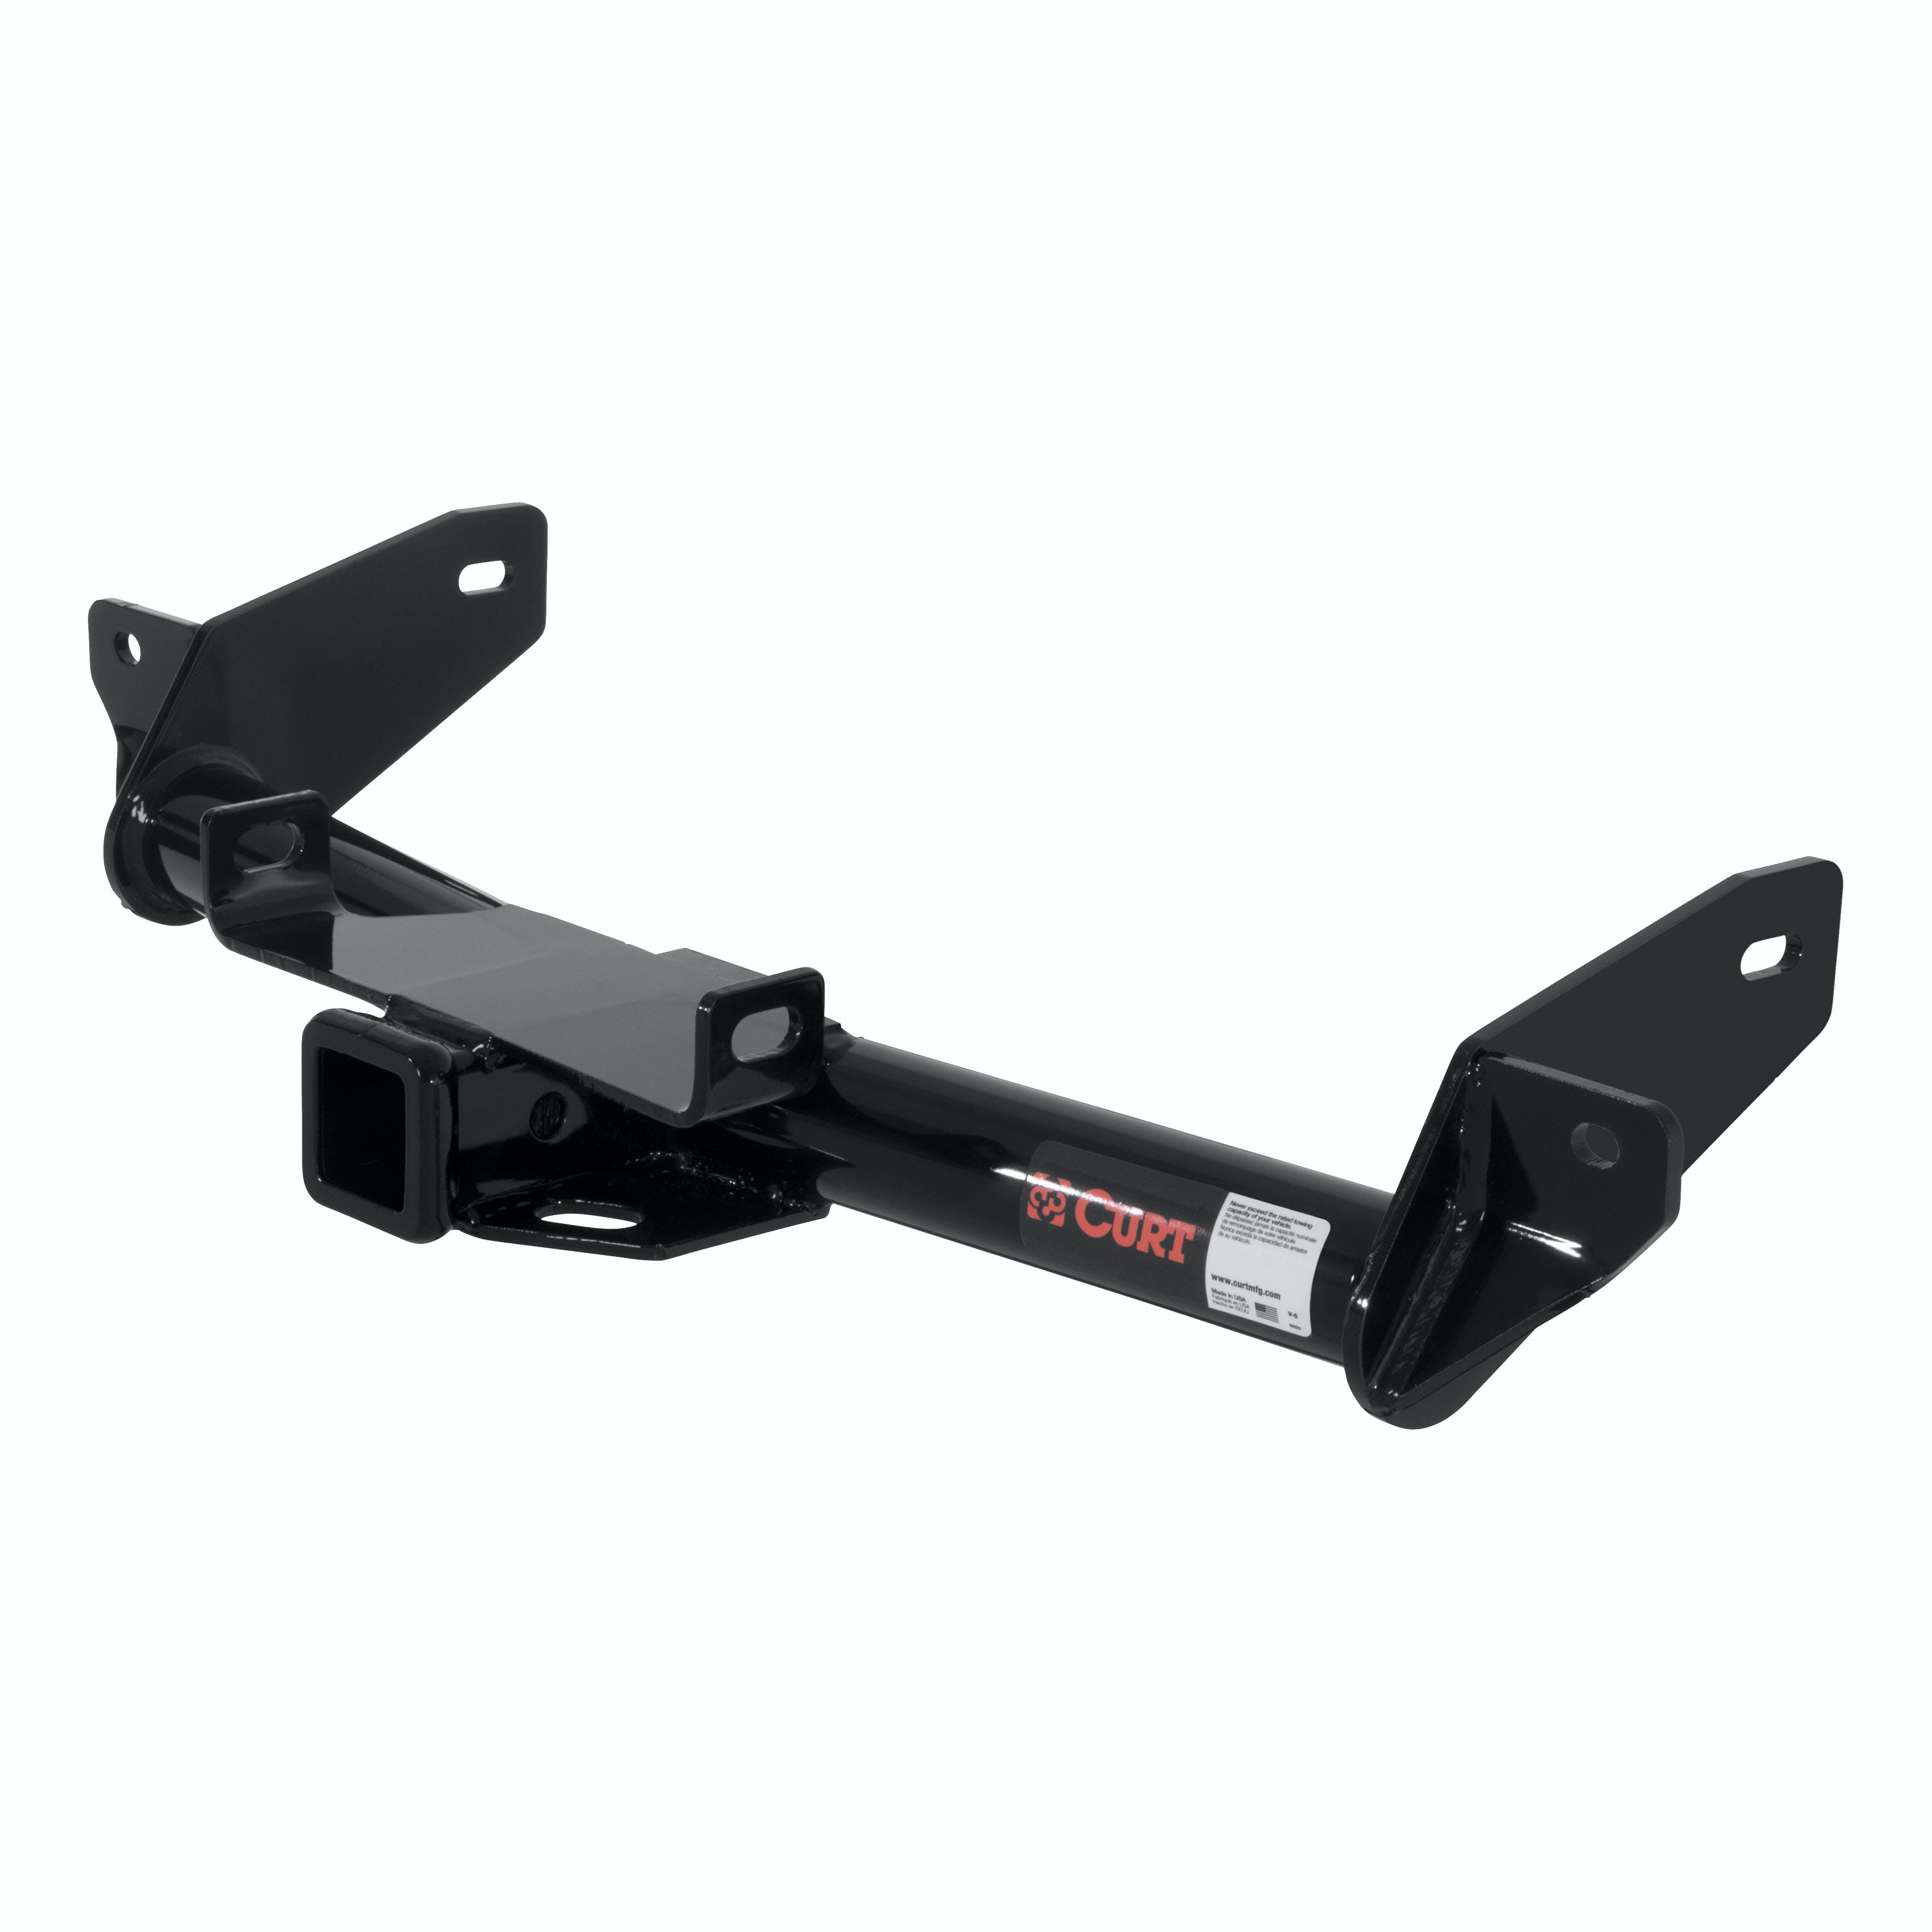 CURT 13365 Class 3 Hitch, 2, Select Ford F-150, Lincoln Mark LT (Round Tube Frame)